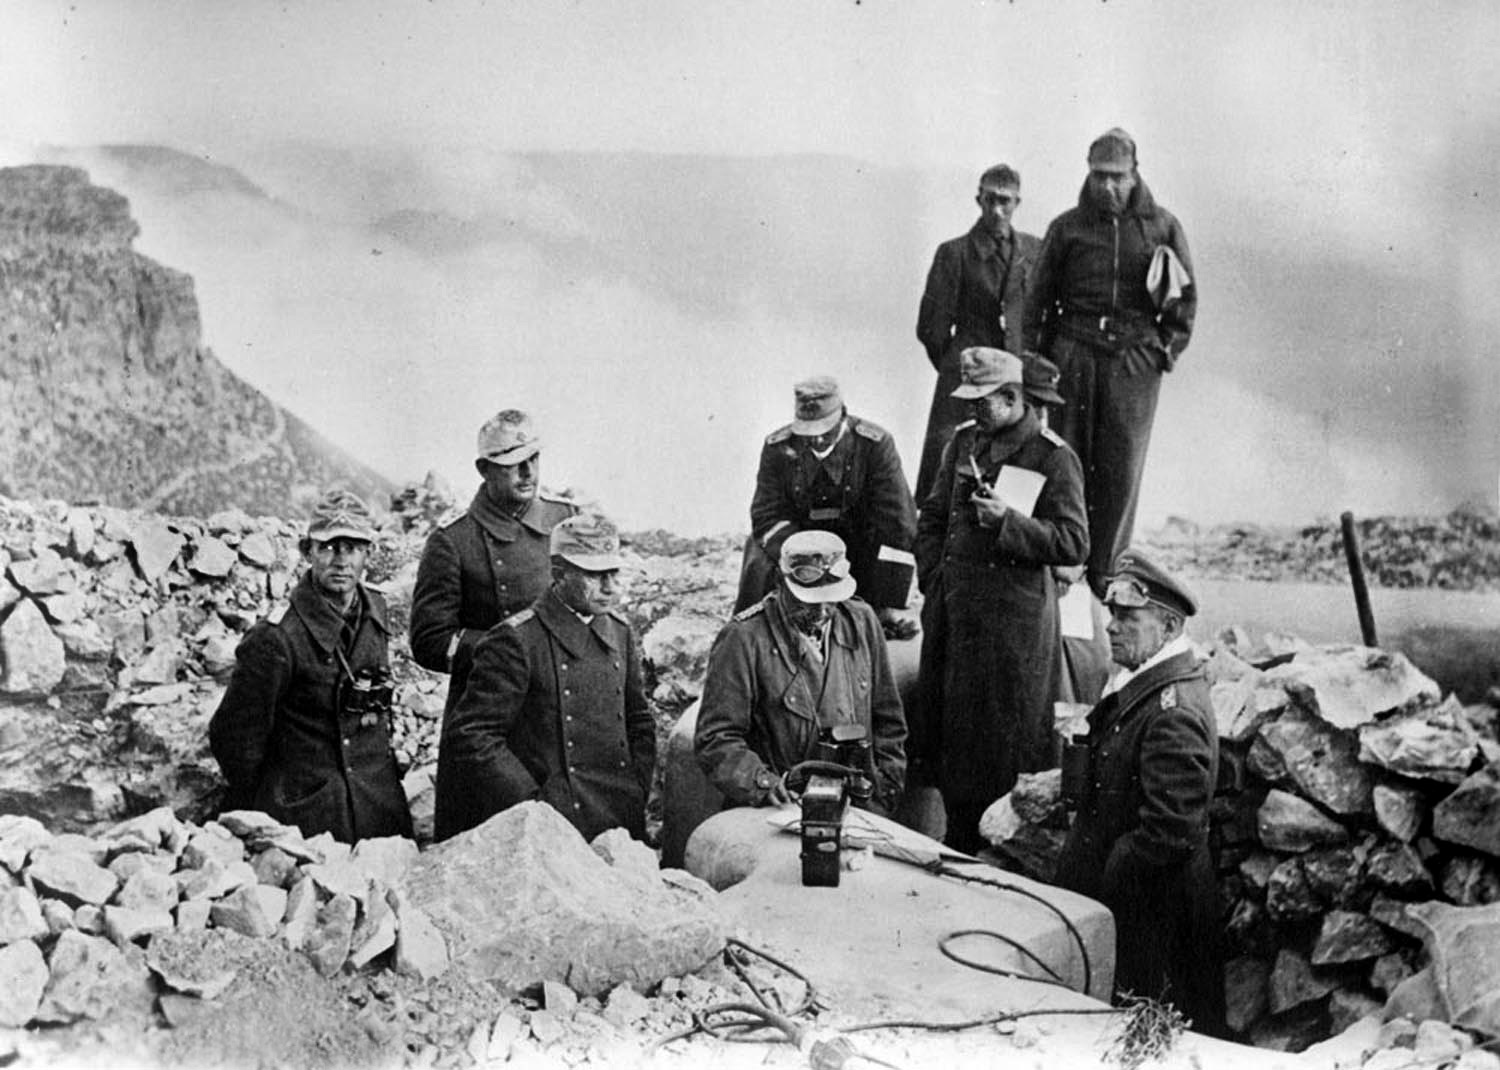 Rommel (lower right) and his despondent staff in the desert during his long retreat from El Agheila, late 1942. The defeat tarnished Rommel’s reputation, but Hitler still selected him to bolster German defenses in Normandy less than two years later.